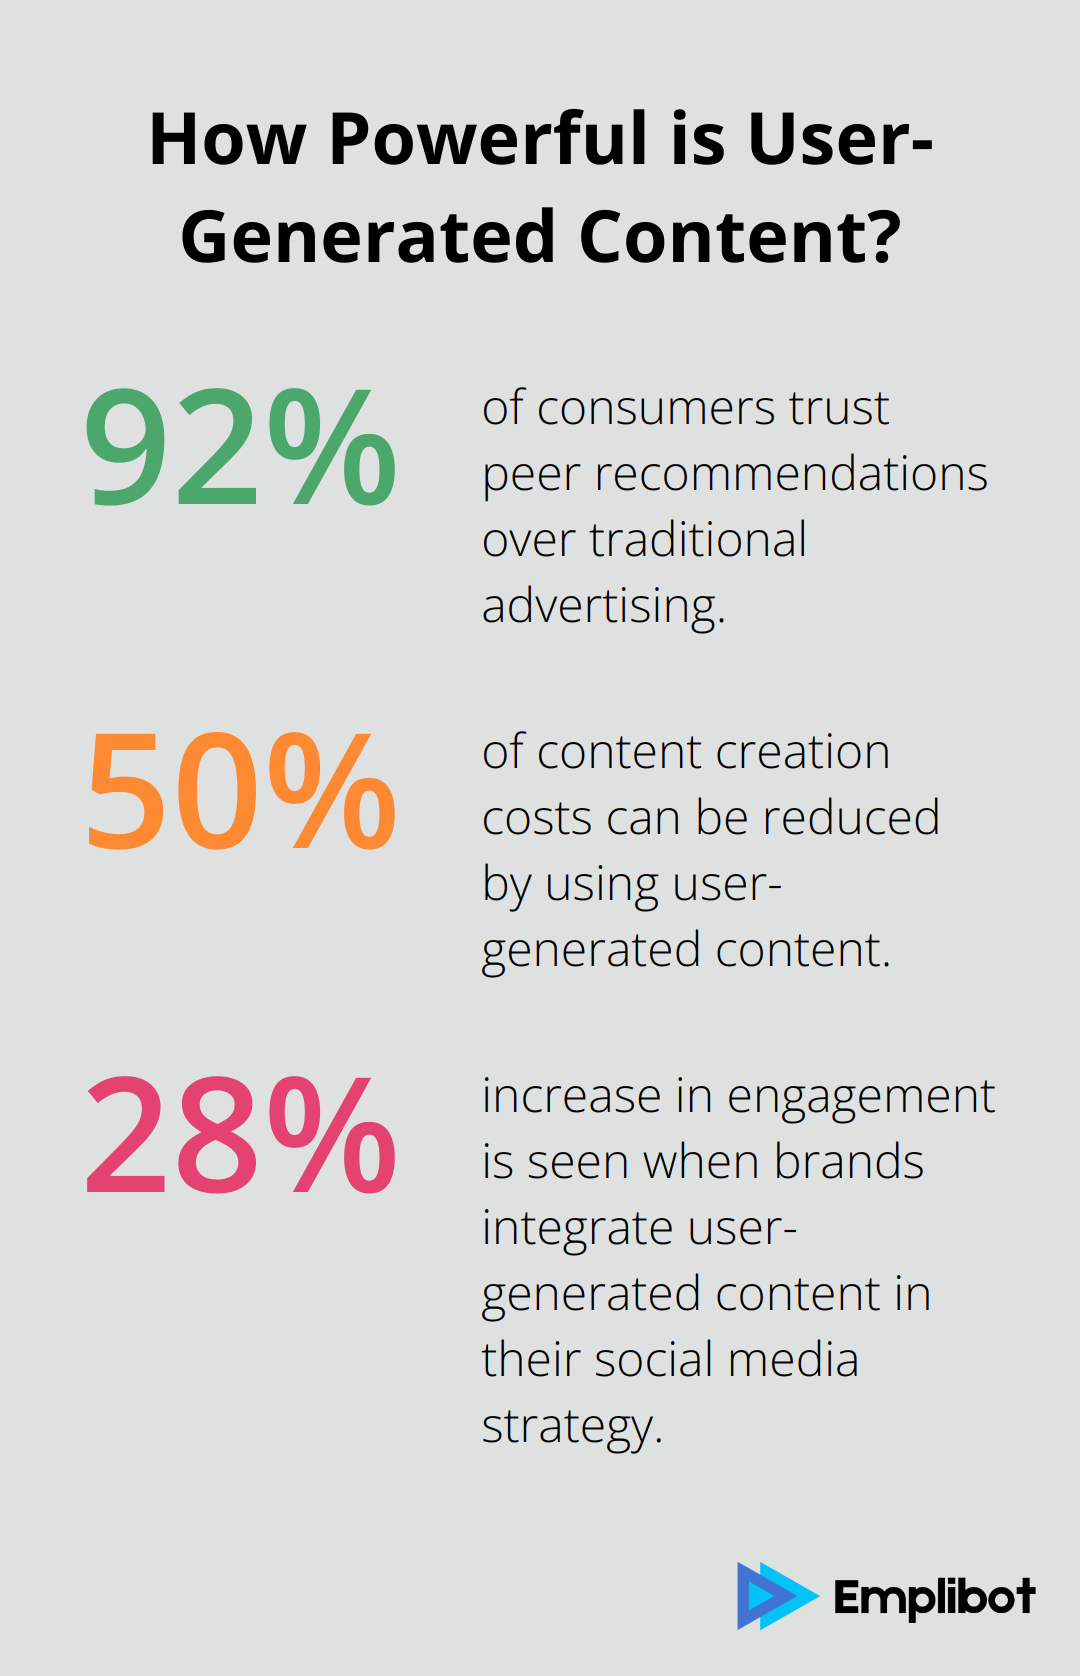 Fact - How Powerful is User-Generated Content?